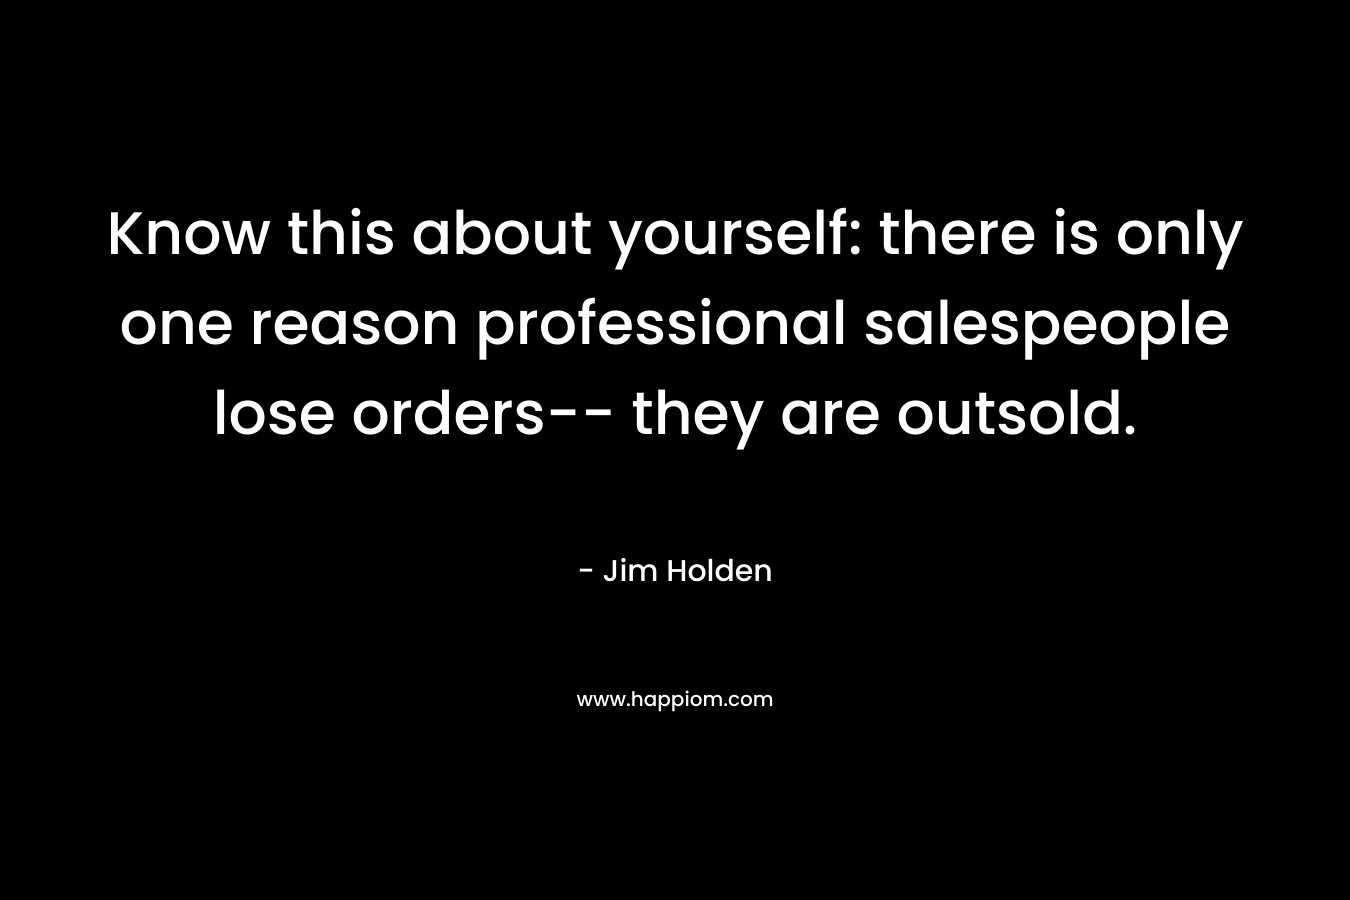 Know this about yourself: there is only one reason professional salespeople lose orders-- they are outsold.